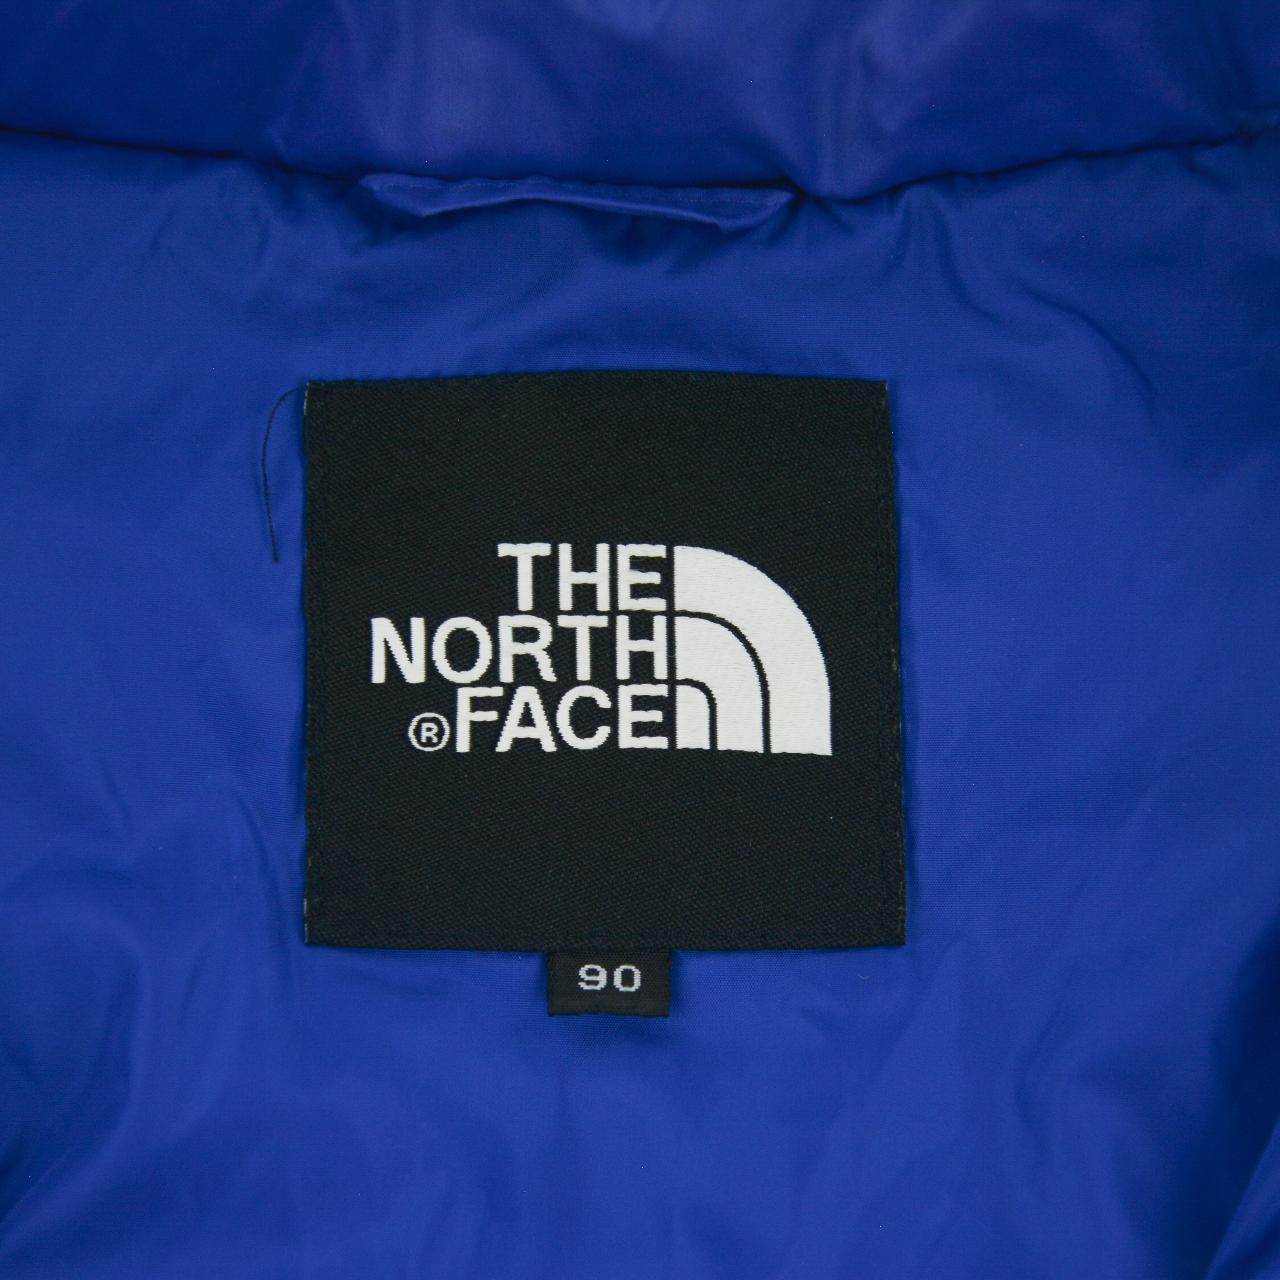 Vintage North Face Puffer Jacket Woman’s Size M - Known Source